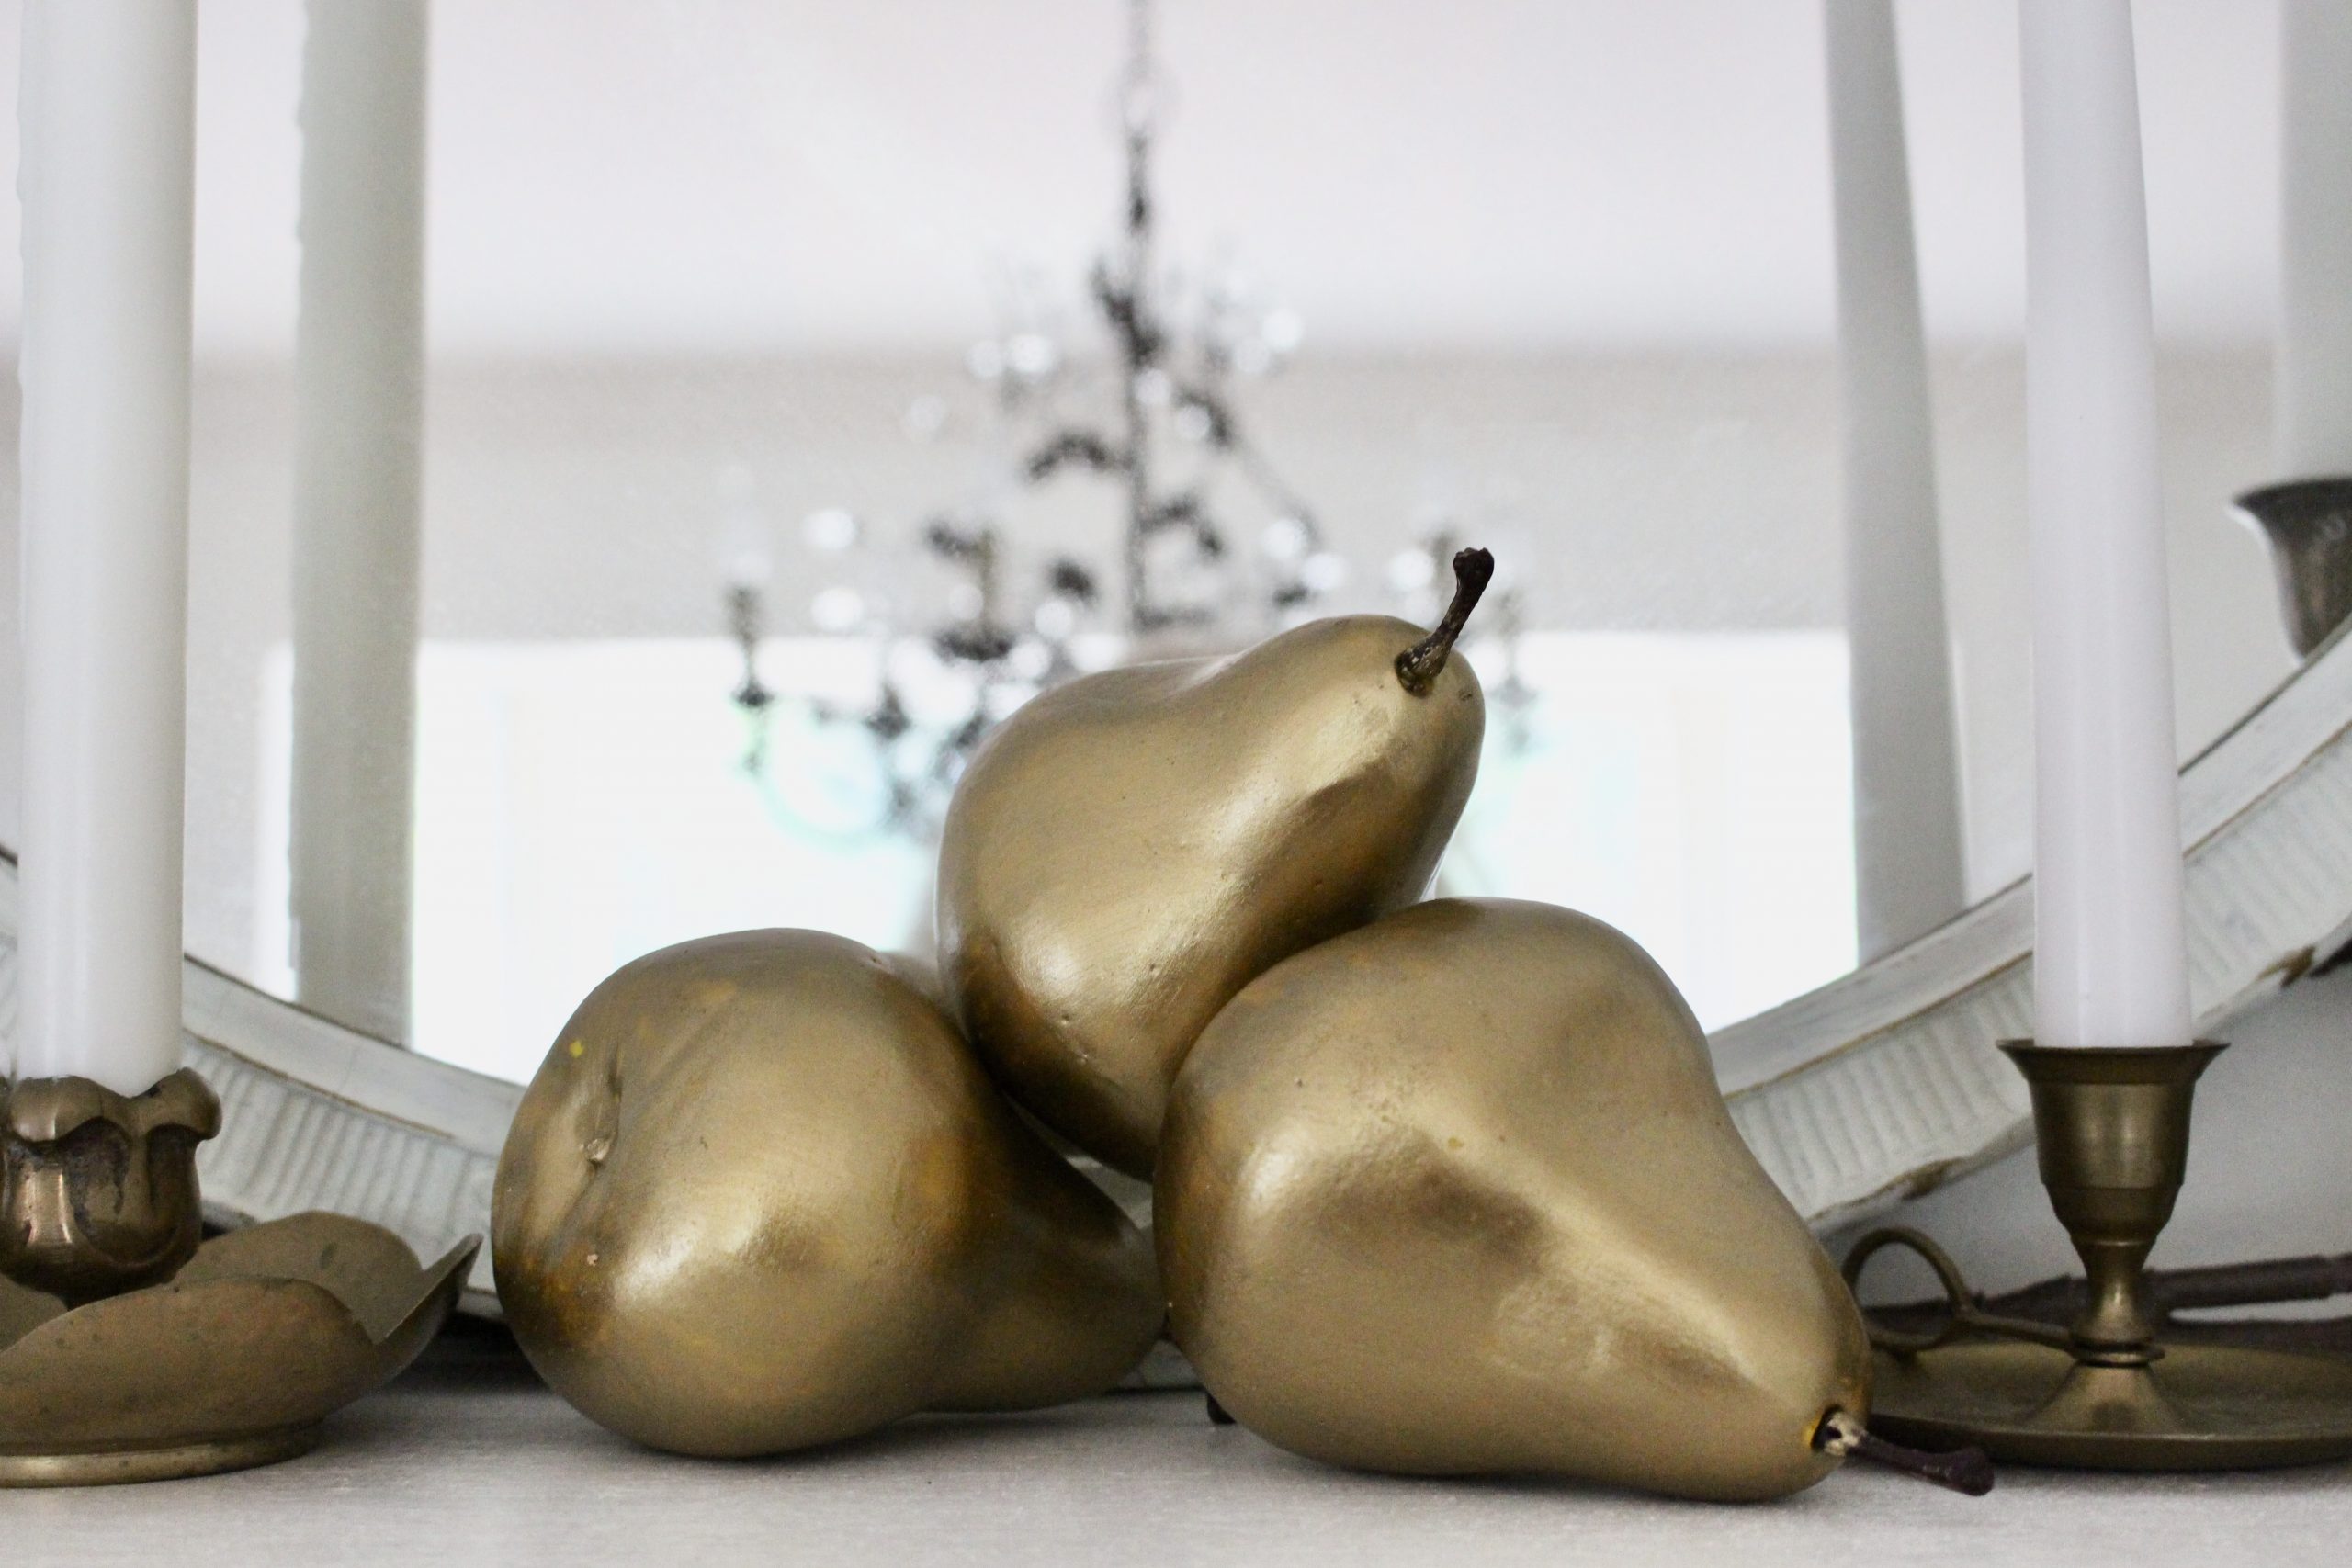 Dressing a Fall Mantel with Vintage Candlesticks and DIY Pears